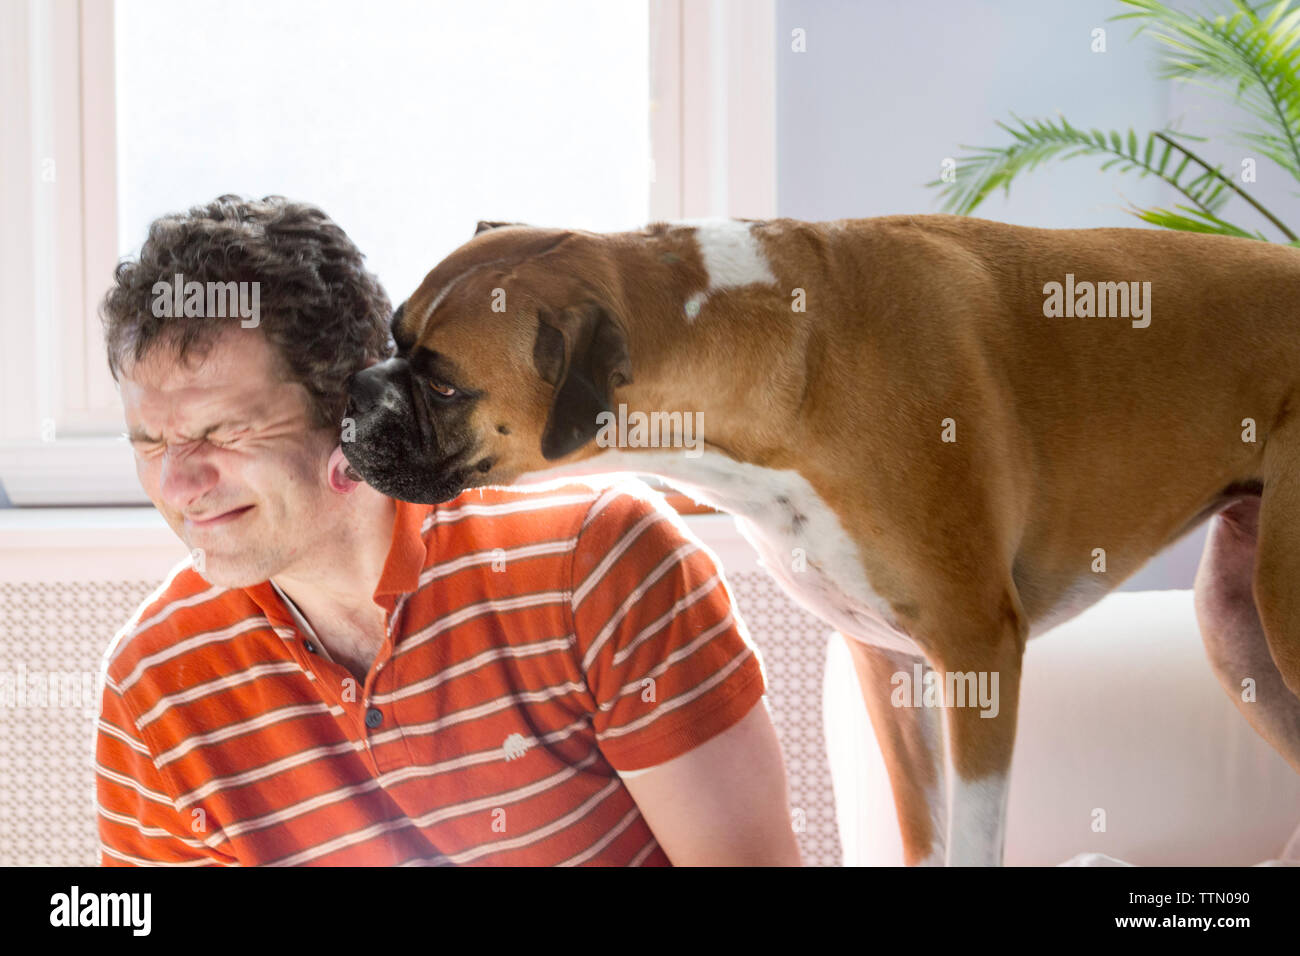 Brown boxer dog licking caucasian man in the face. Man is squinting and leaning away. Stock Photo